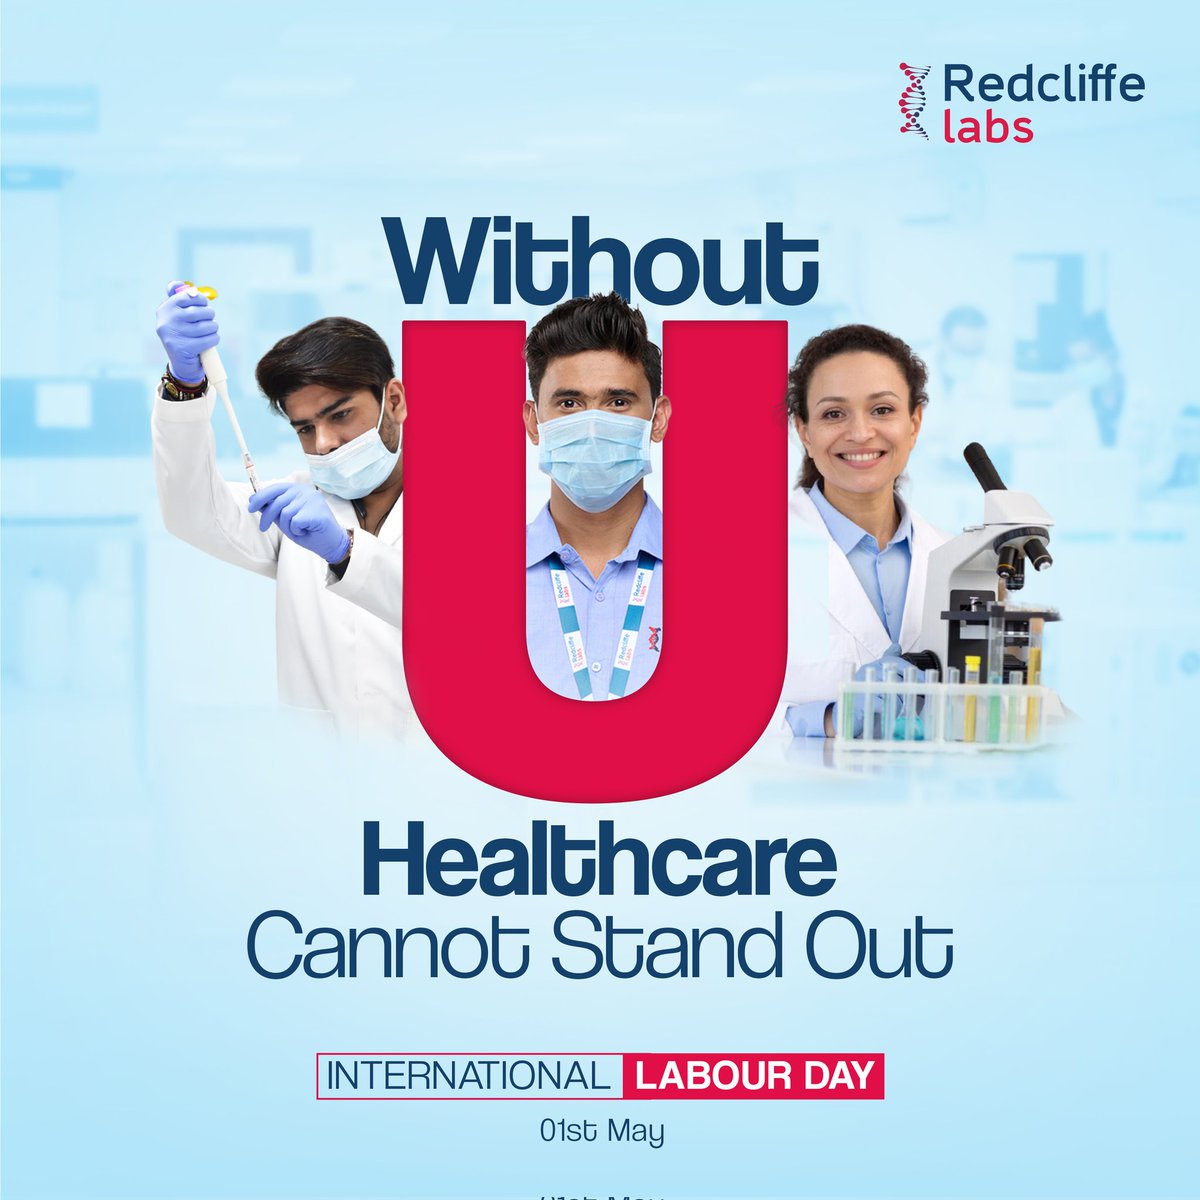 On International Labor Day, we celebrate the tireless efforts of healthcare professionals who keep us standing strong. From the front lines to behind the scenes, your hard work ensures our well-being. We at Redcliffe Labs honor and appreciate your invaluable contributions.